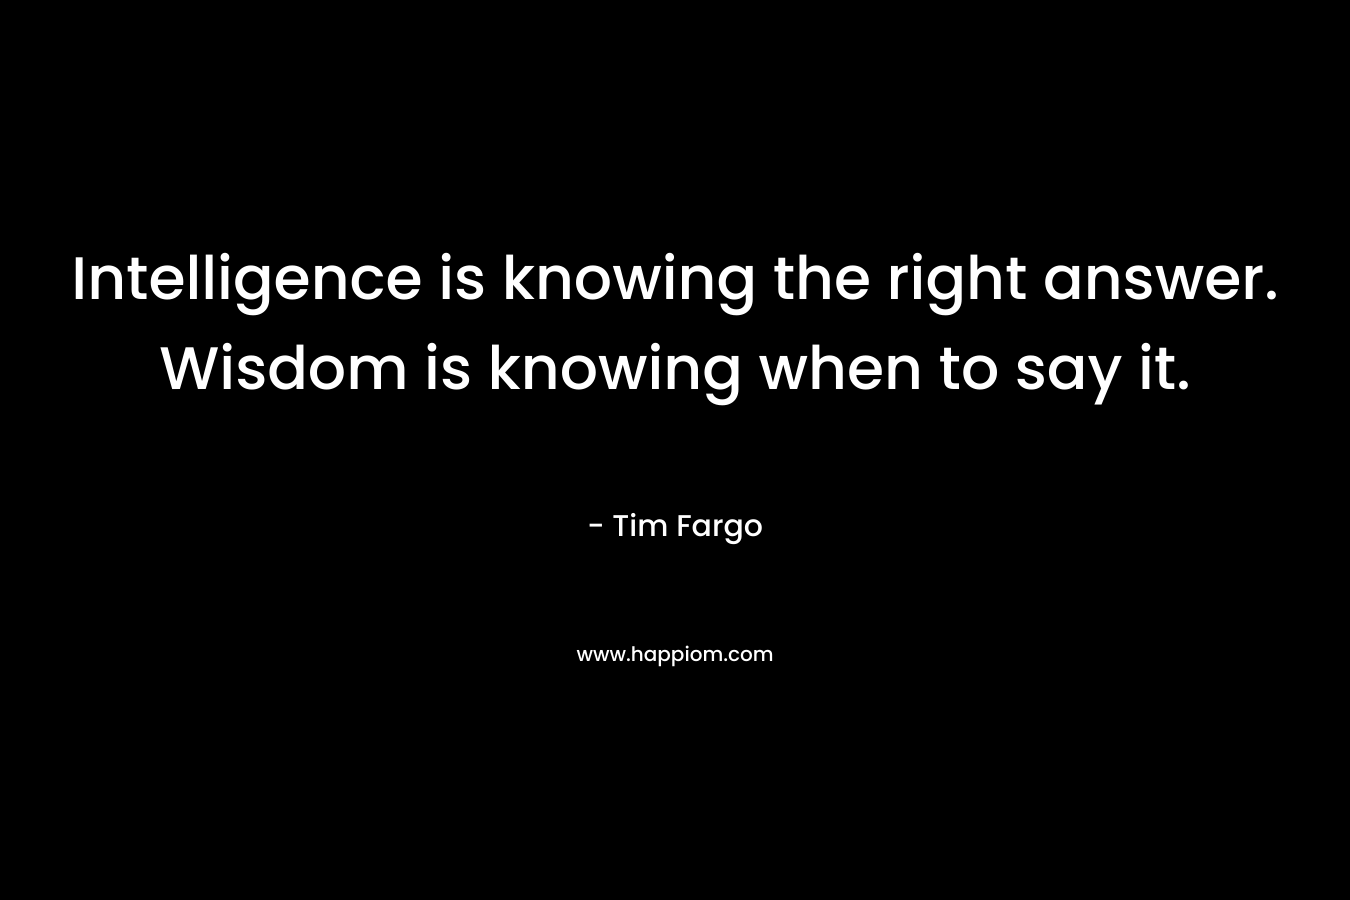 Intelligence is knowing the right answer. Wisdom is knowing when to say it.